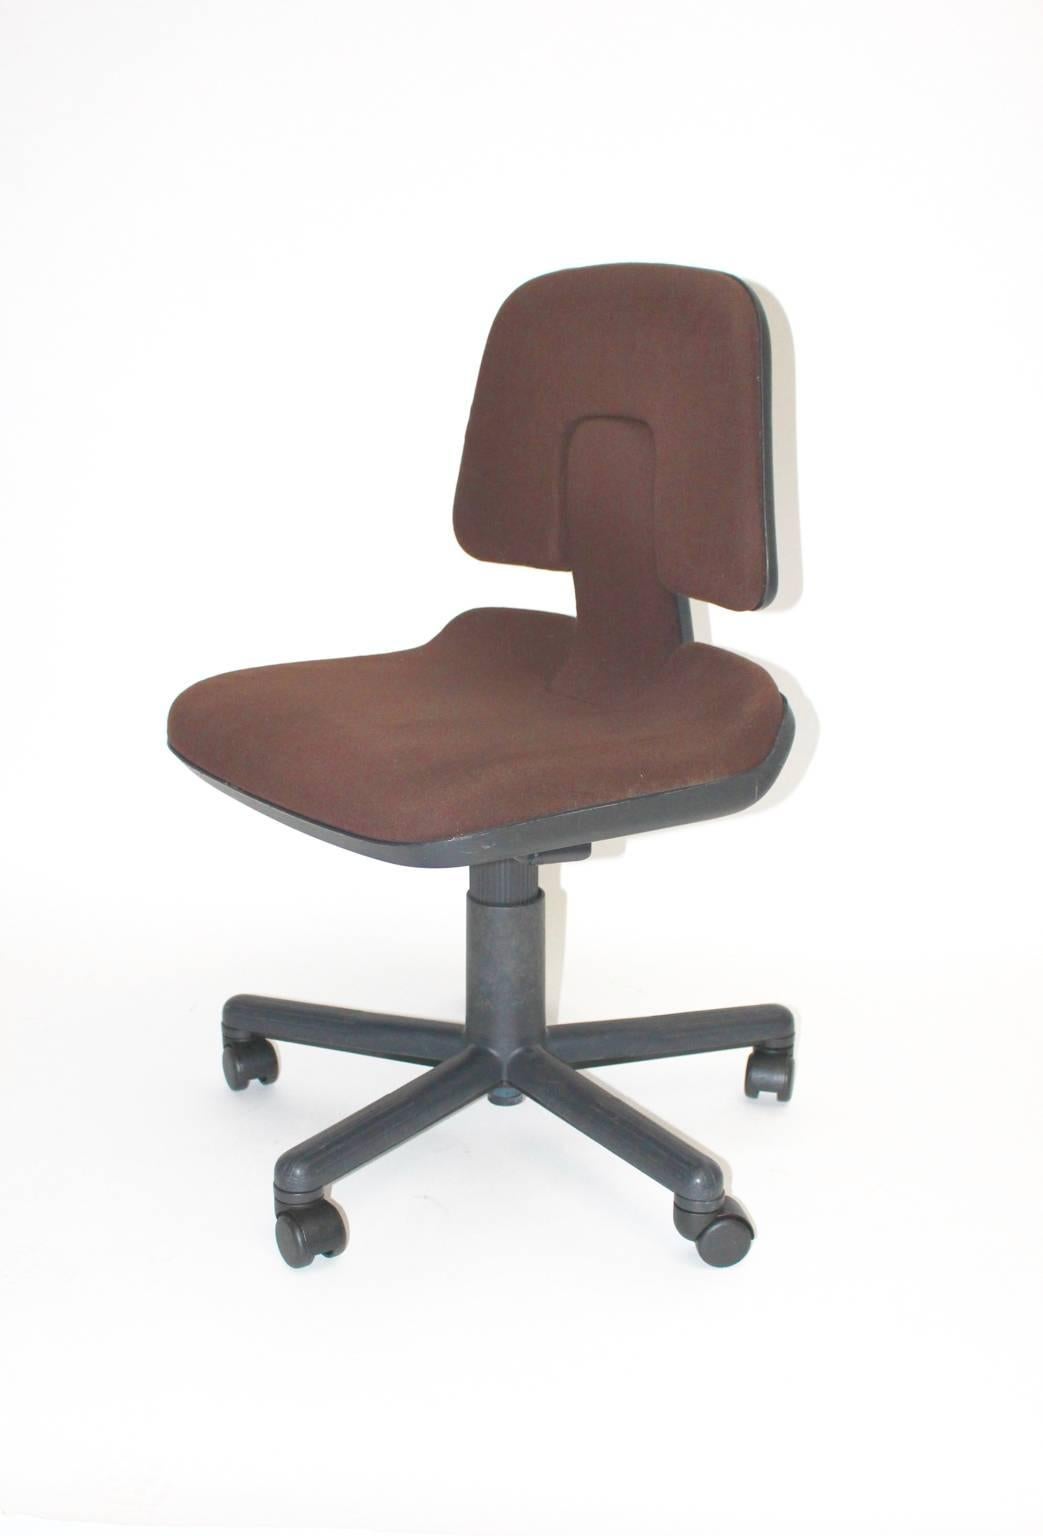 Postmodern vintage office chair designed in 1976 by Wolfgang Mueller Deisig for Vitra. The office chair features a black PVC seat shell with a foam upholstered seat and back and covered with brown textile fabric.
The chair is adjustable from up to